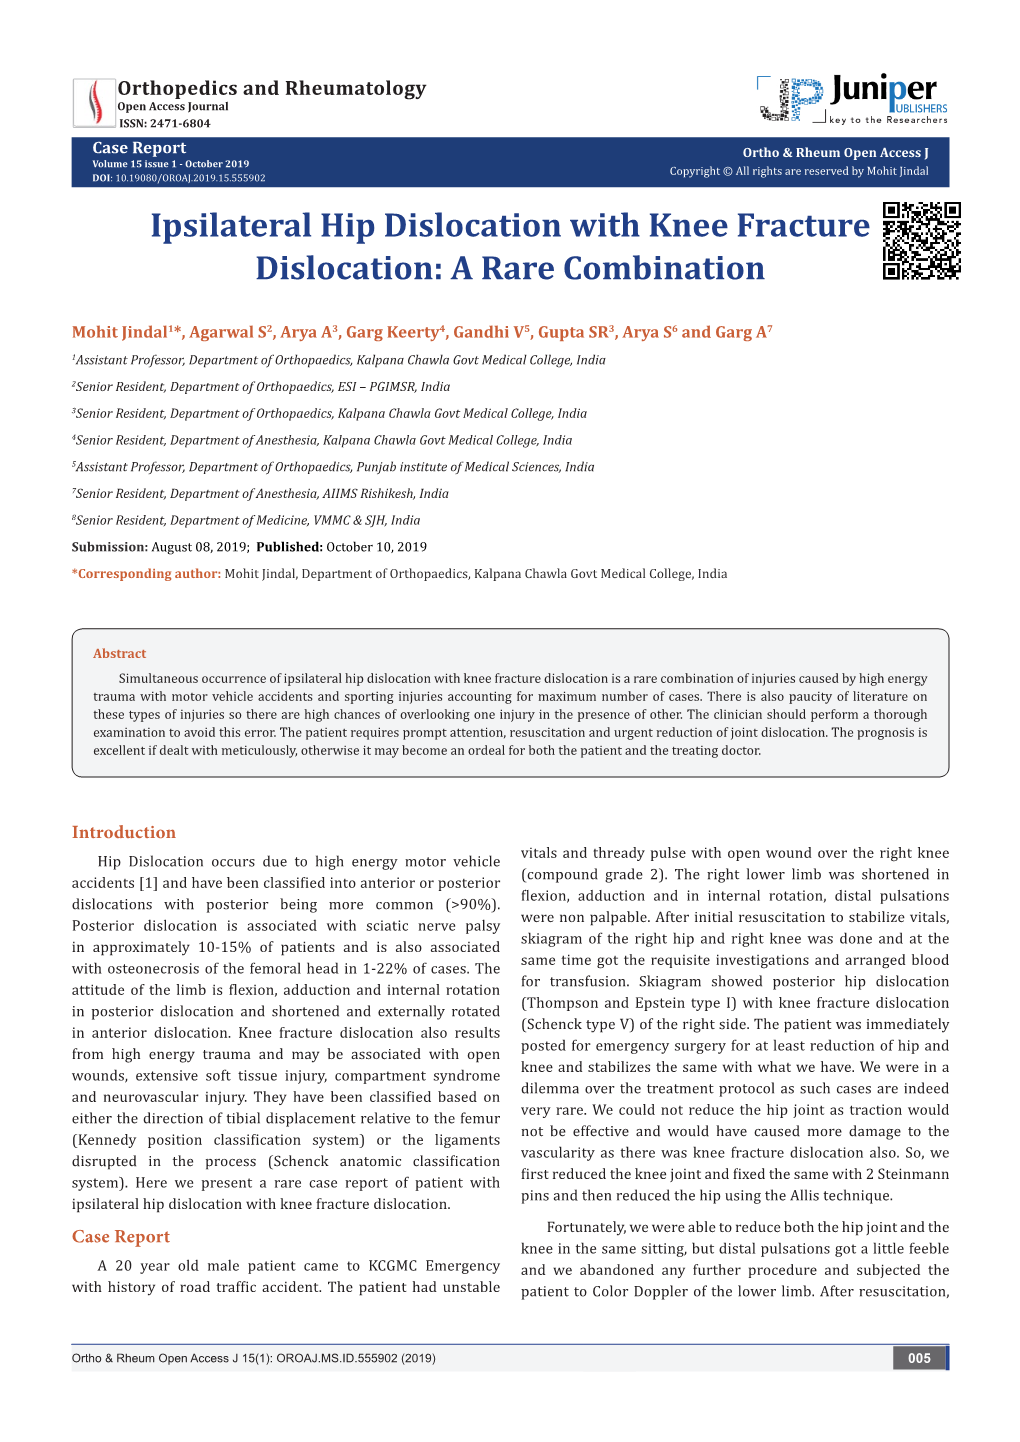 Ipsilateral Hip Dislocation with Knee Fracture Dislocation: a Rare Combination